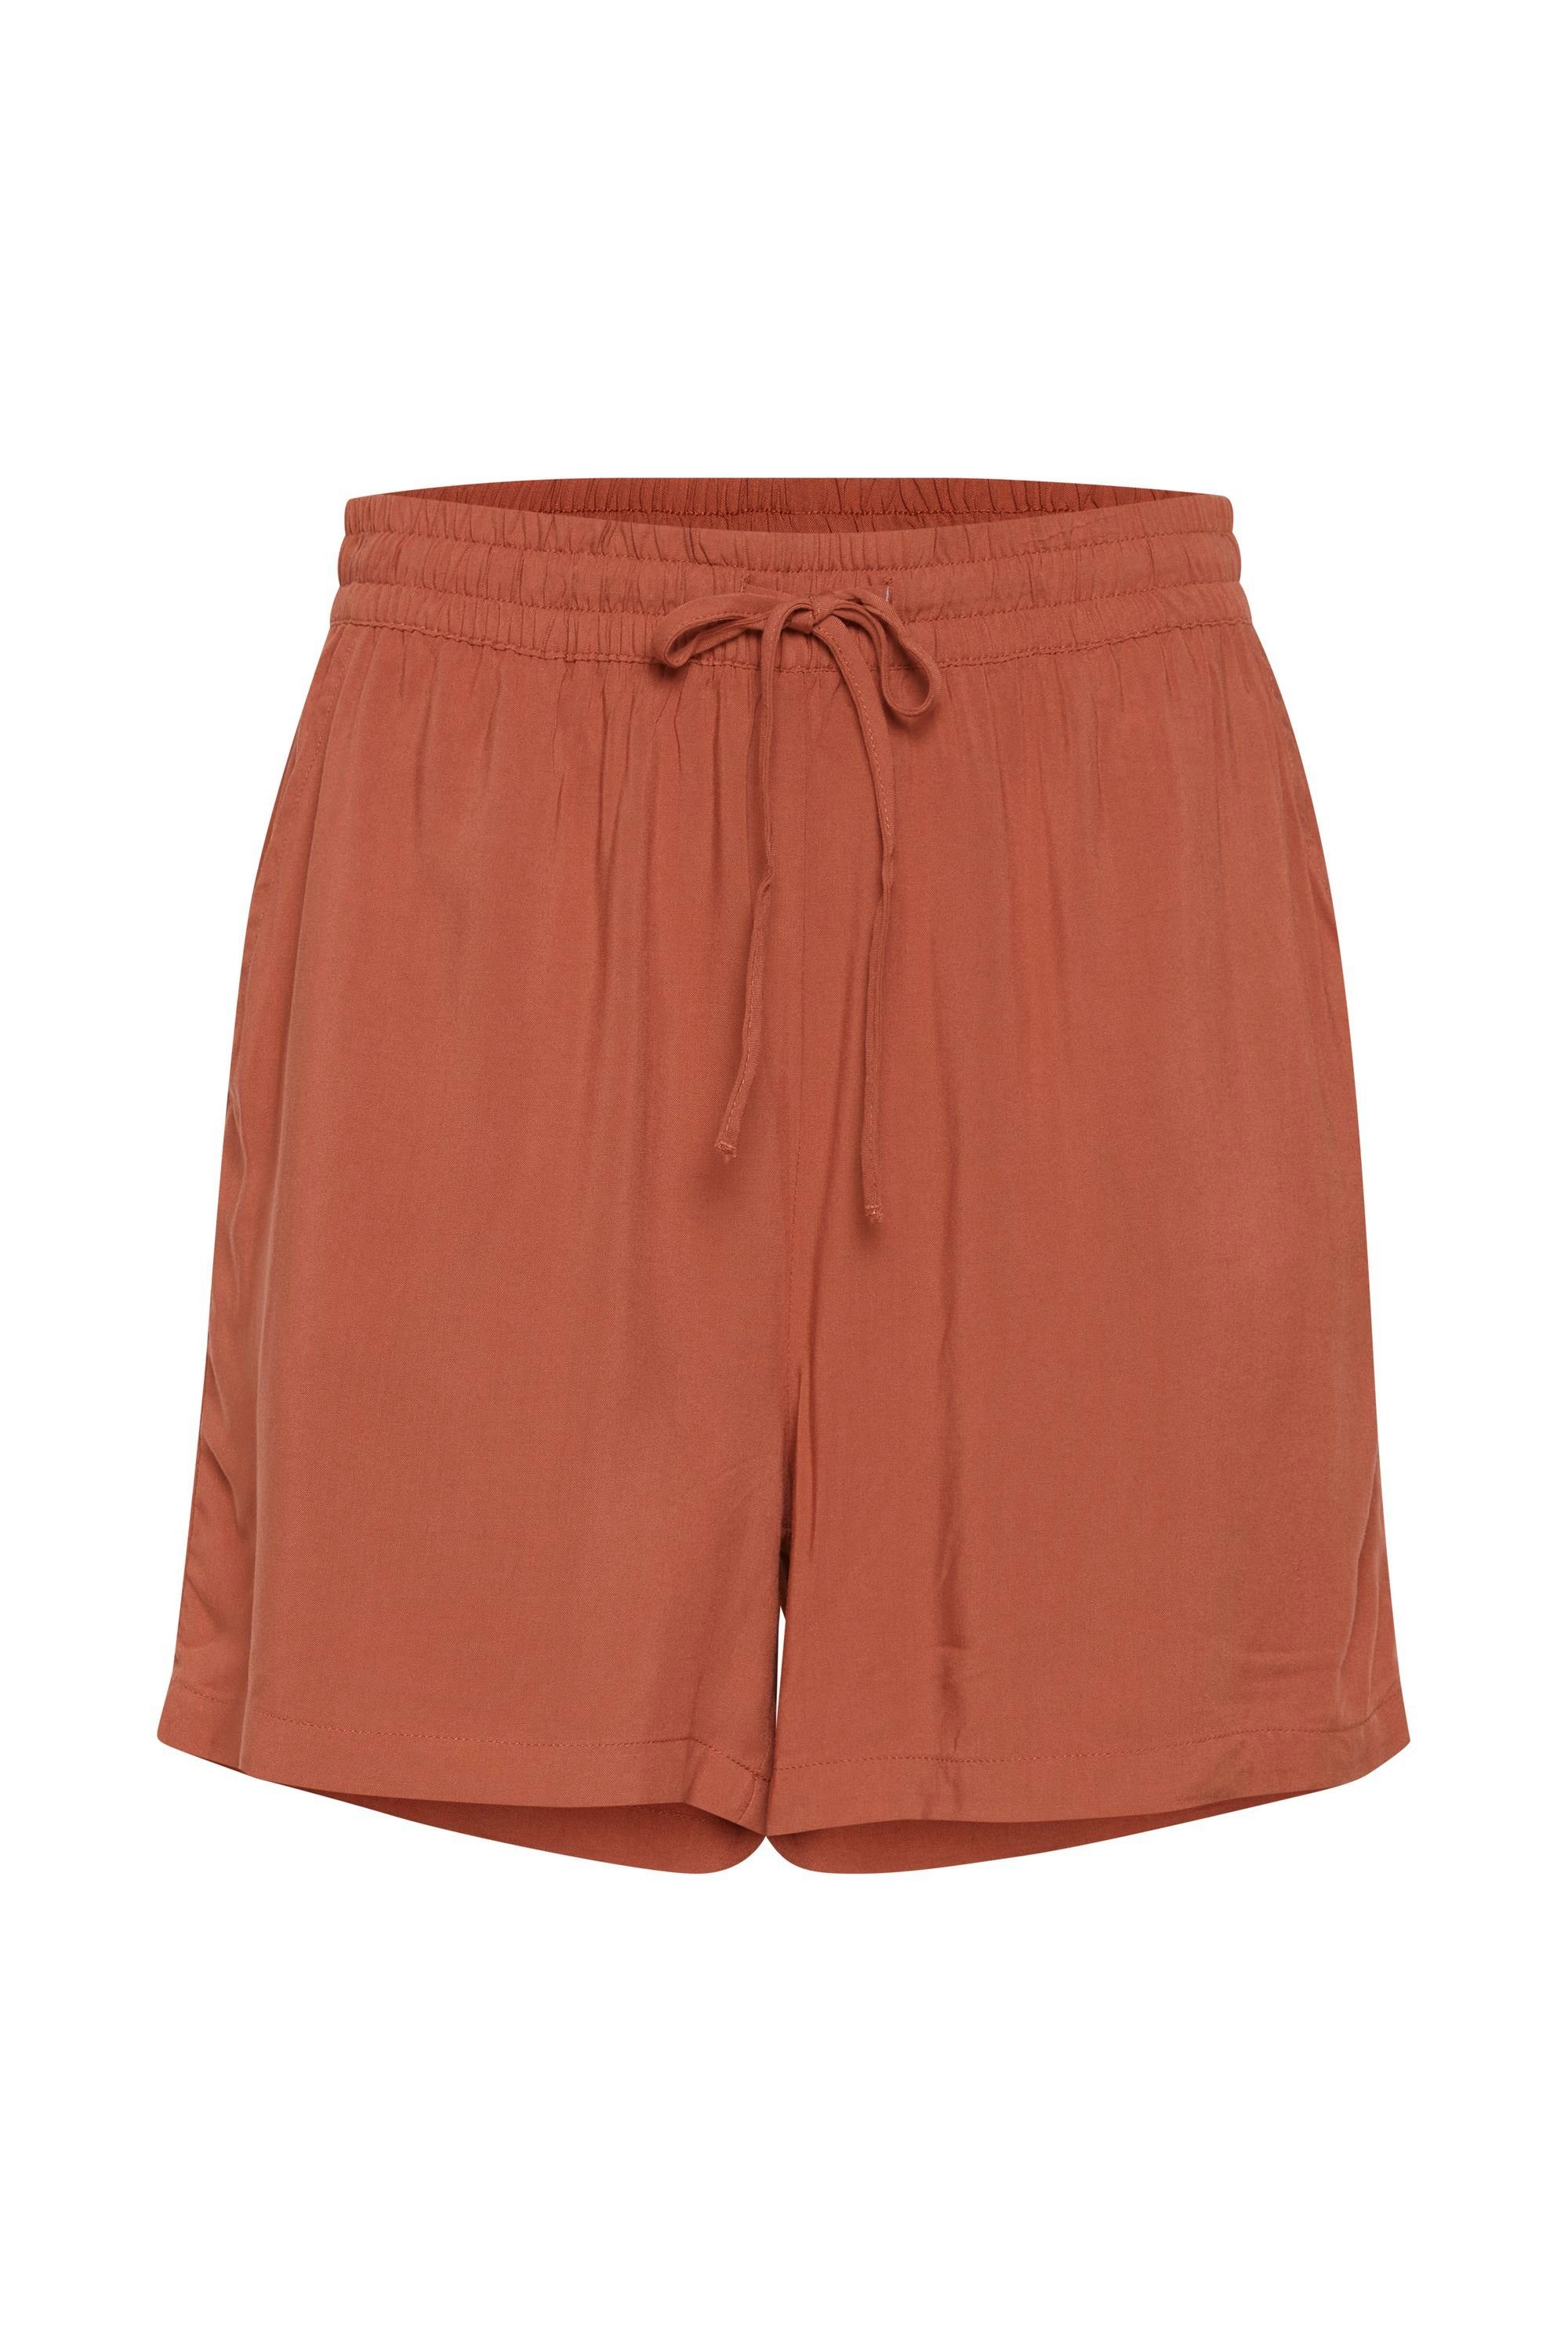 b.young Shorts BYMMJOELLA SHORTS - 20809730 Luftige Shorts mit Muster Etruscan Red (181434)